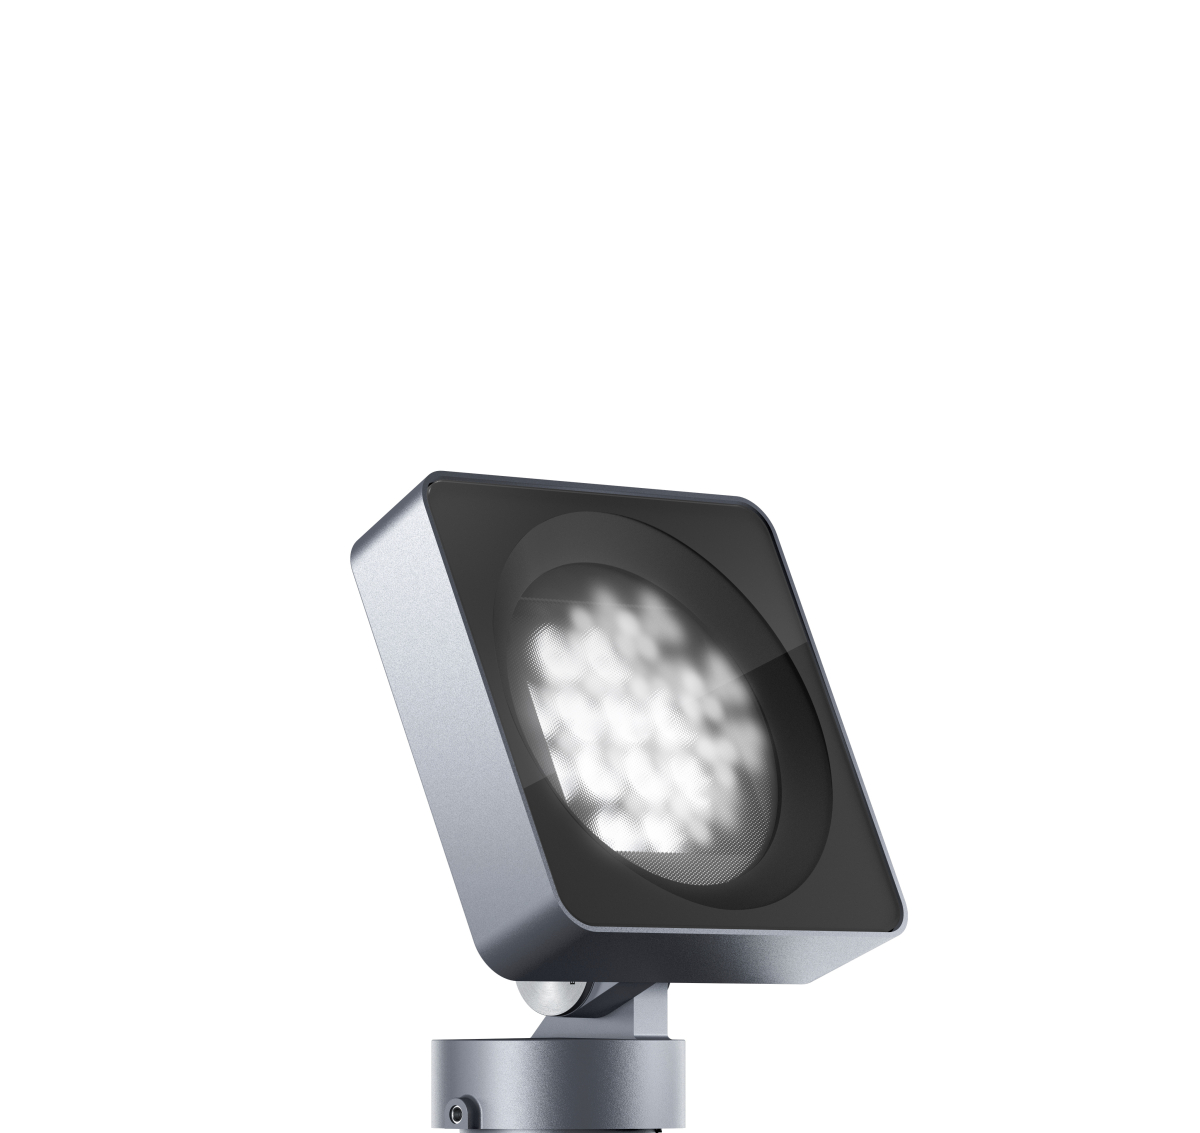 Lightscan IP65 Surf Mtd Floodlight With Mounting Plate Oval Flood Beam 72W LED 4000K ECG Graphit M